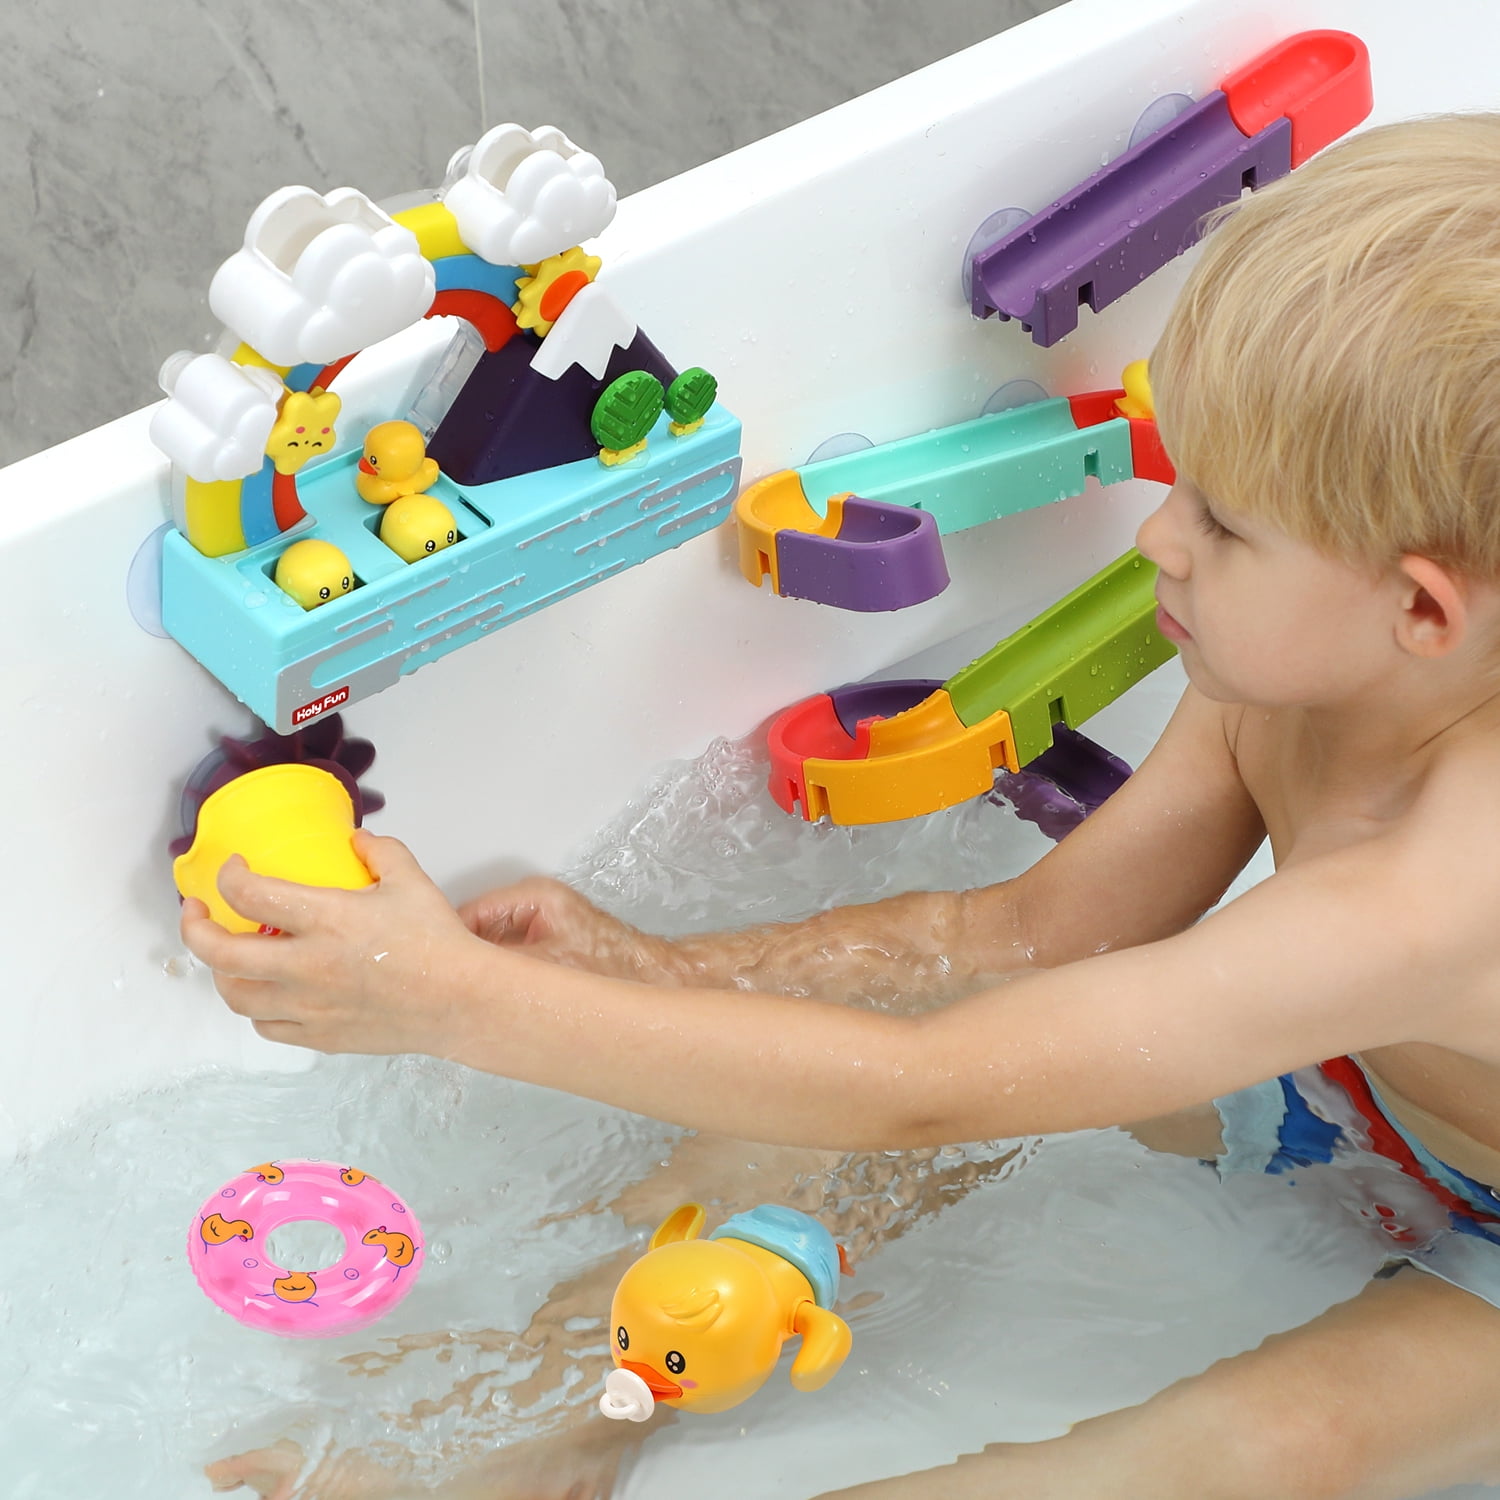 Bathtime Fun with PlayFriends™ - Colorful Bath Toys for Kids